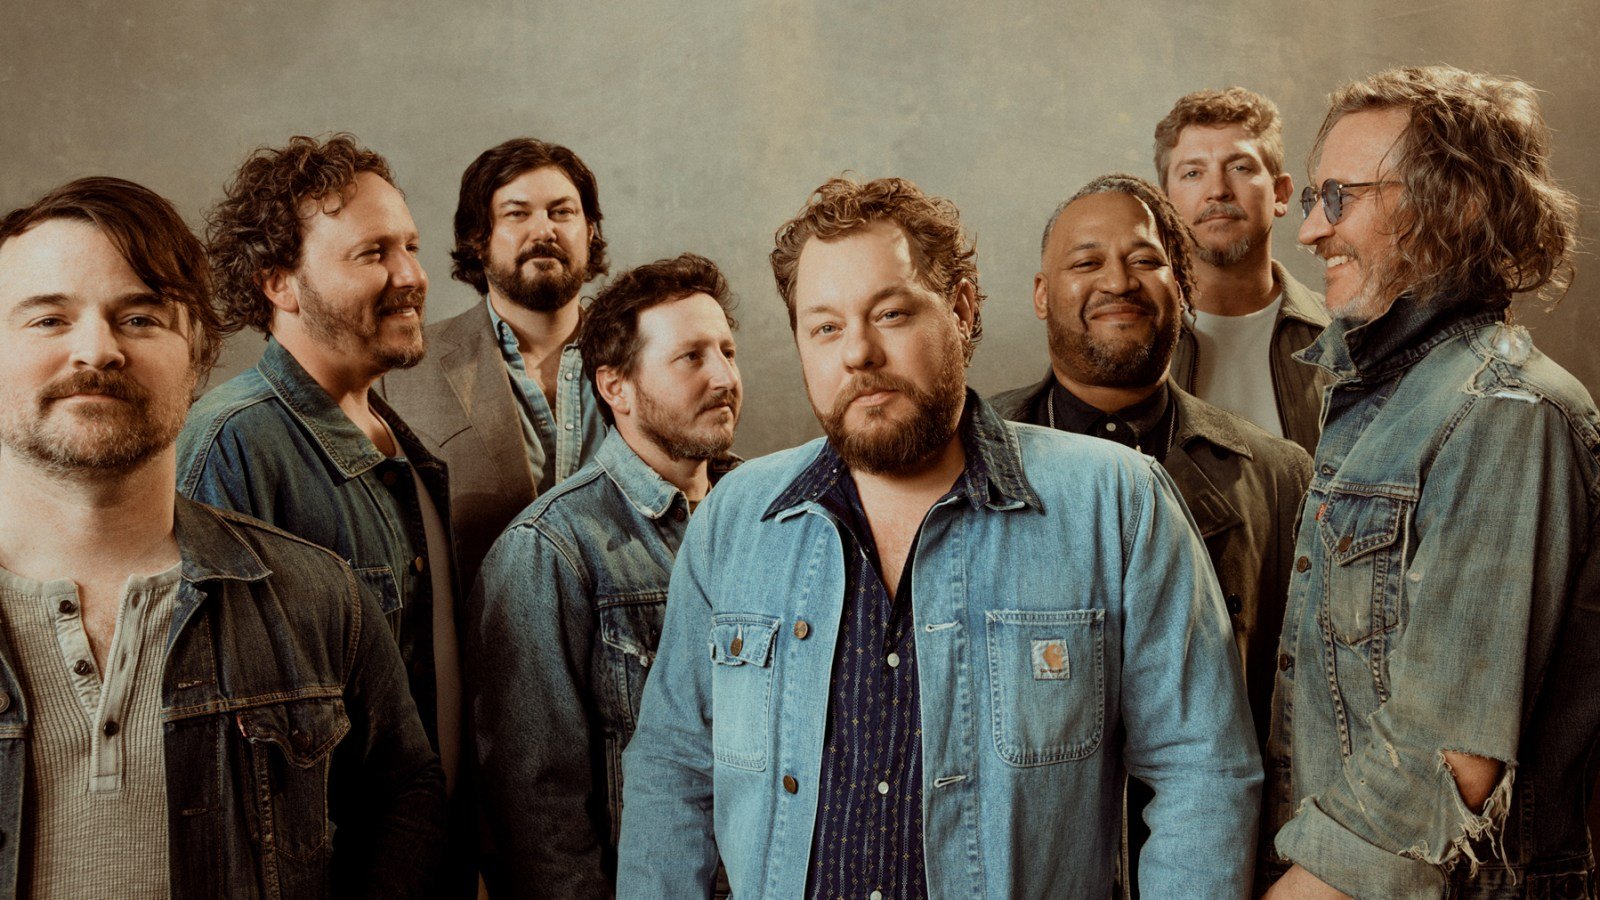 Nathaniel Rateliff Delivers His Most Intimate Album Yet With ‘South of Here’